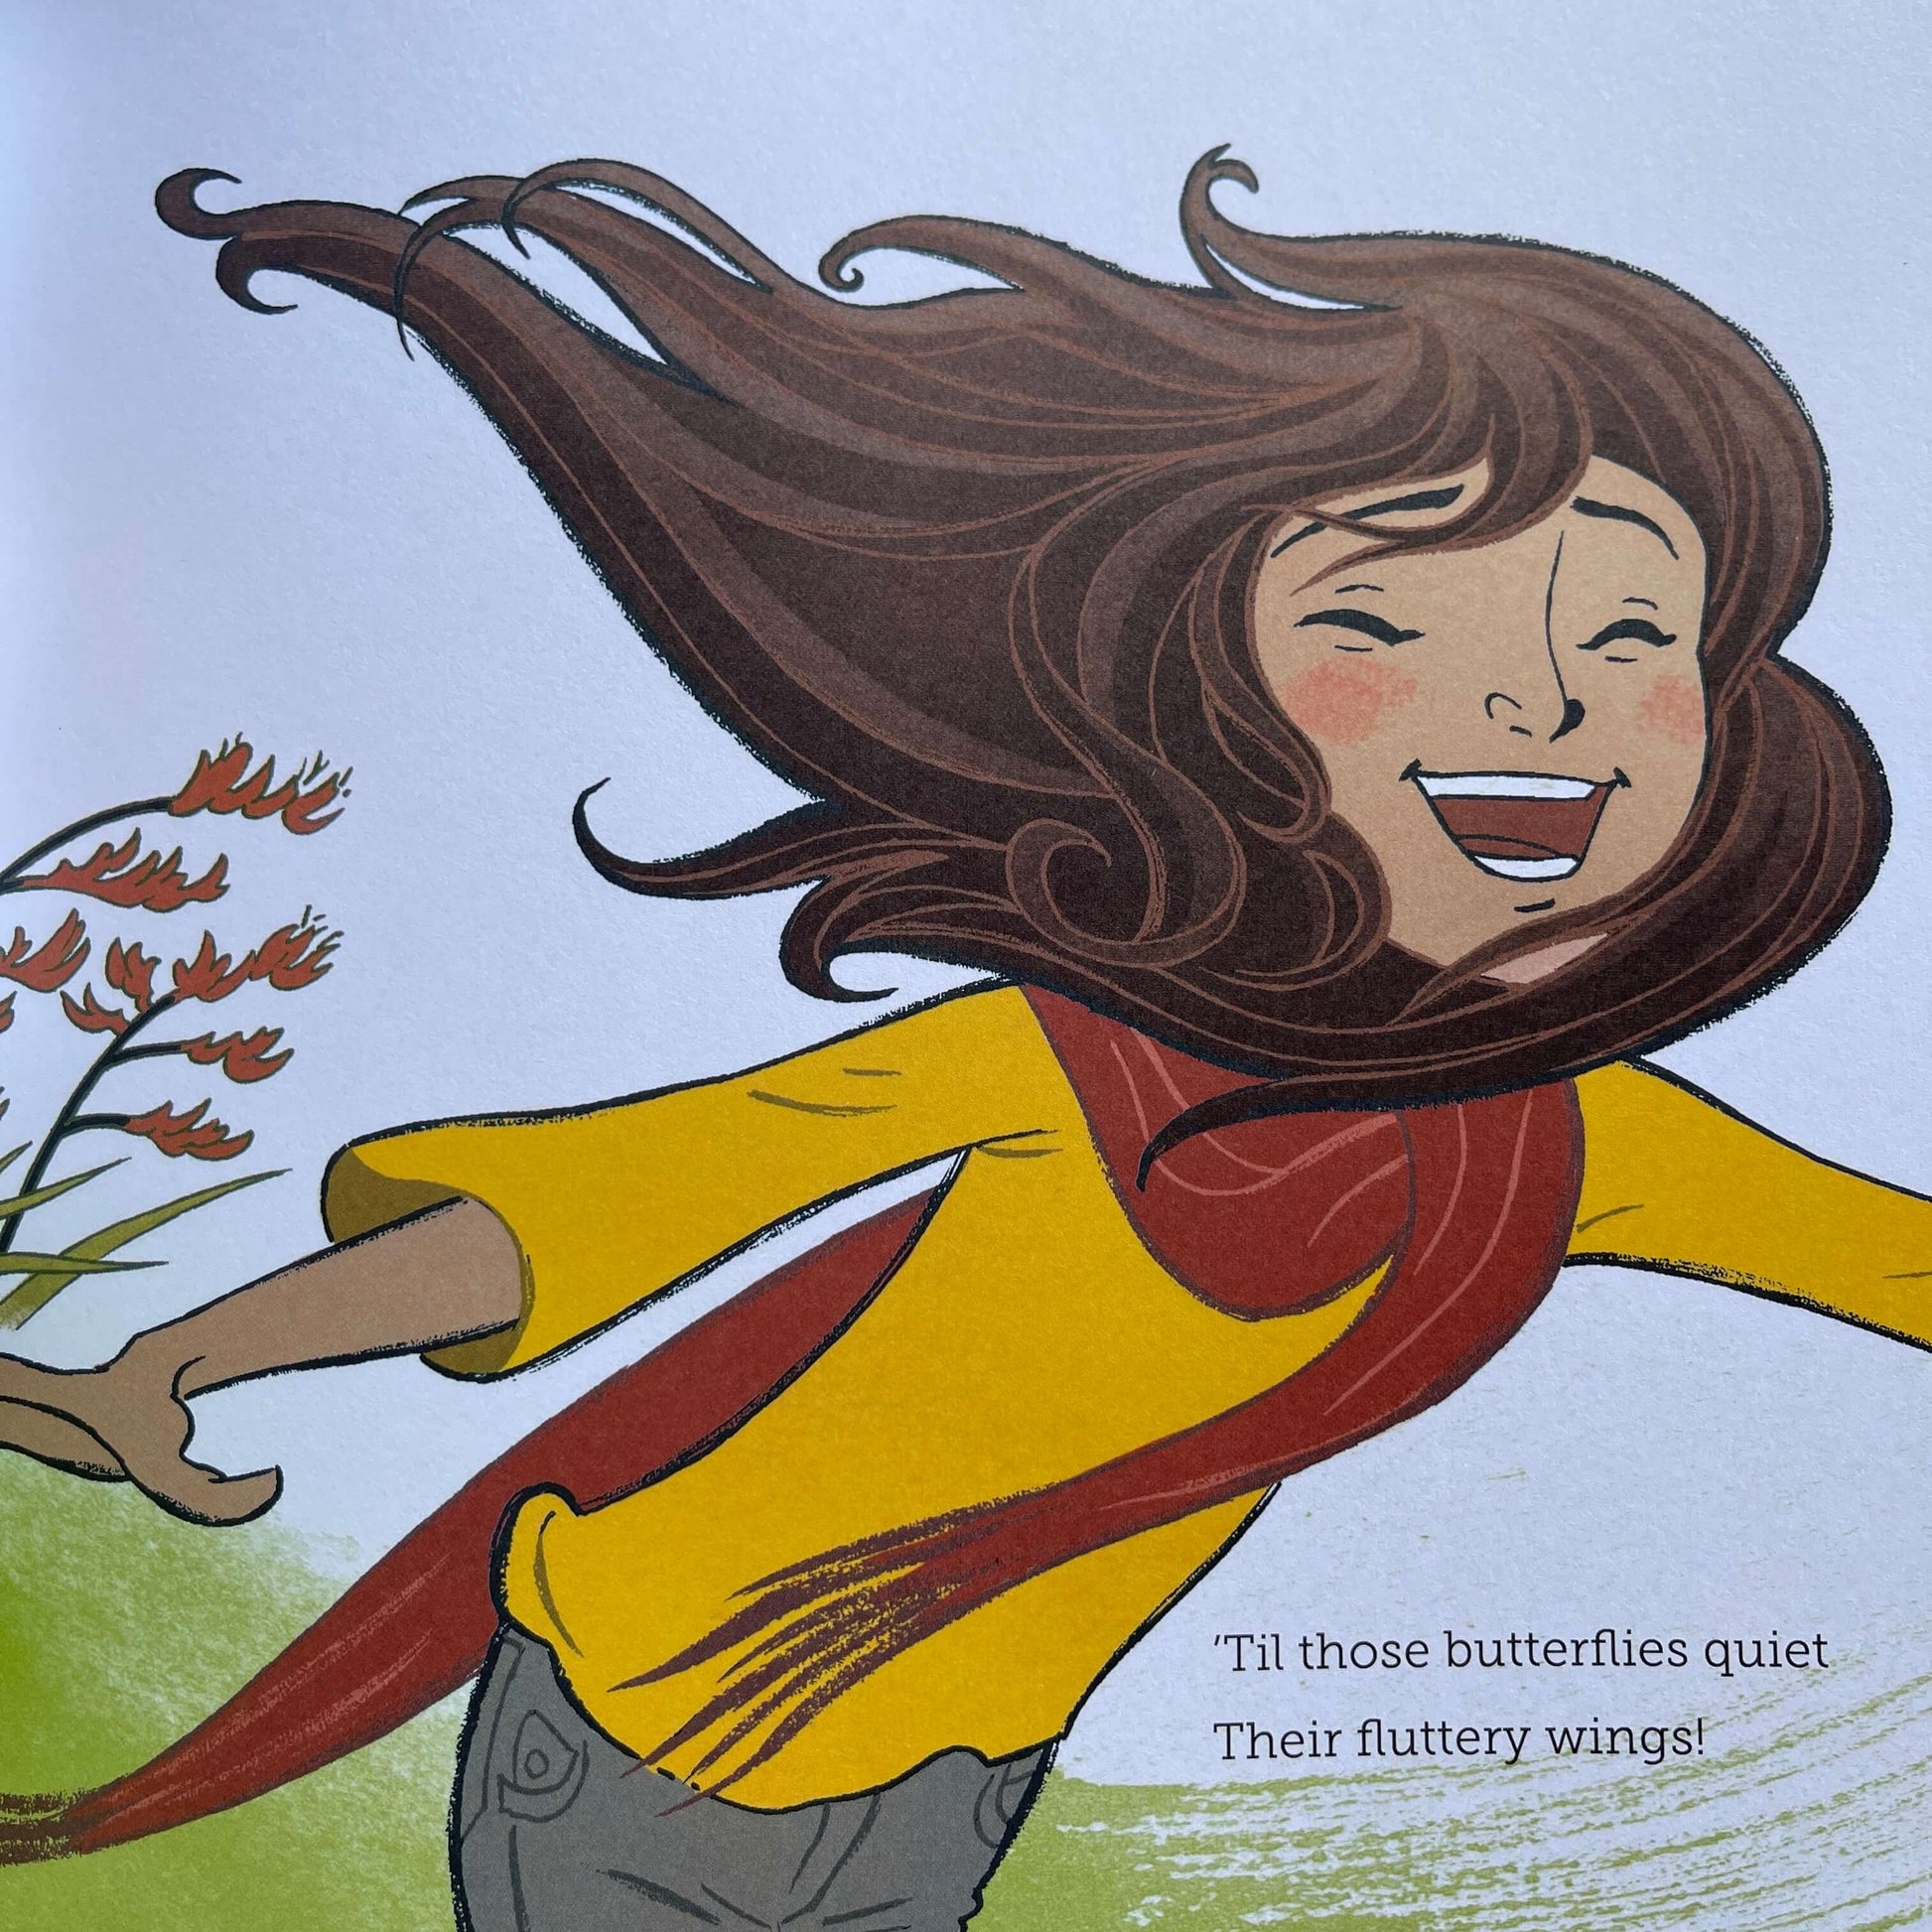 Page from New Zealand based kids book, Aroha's way.